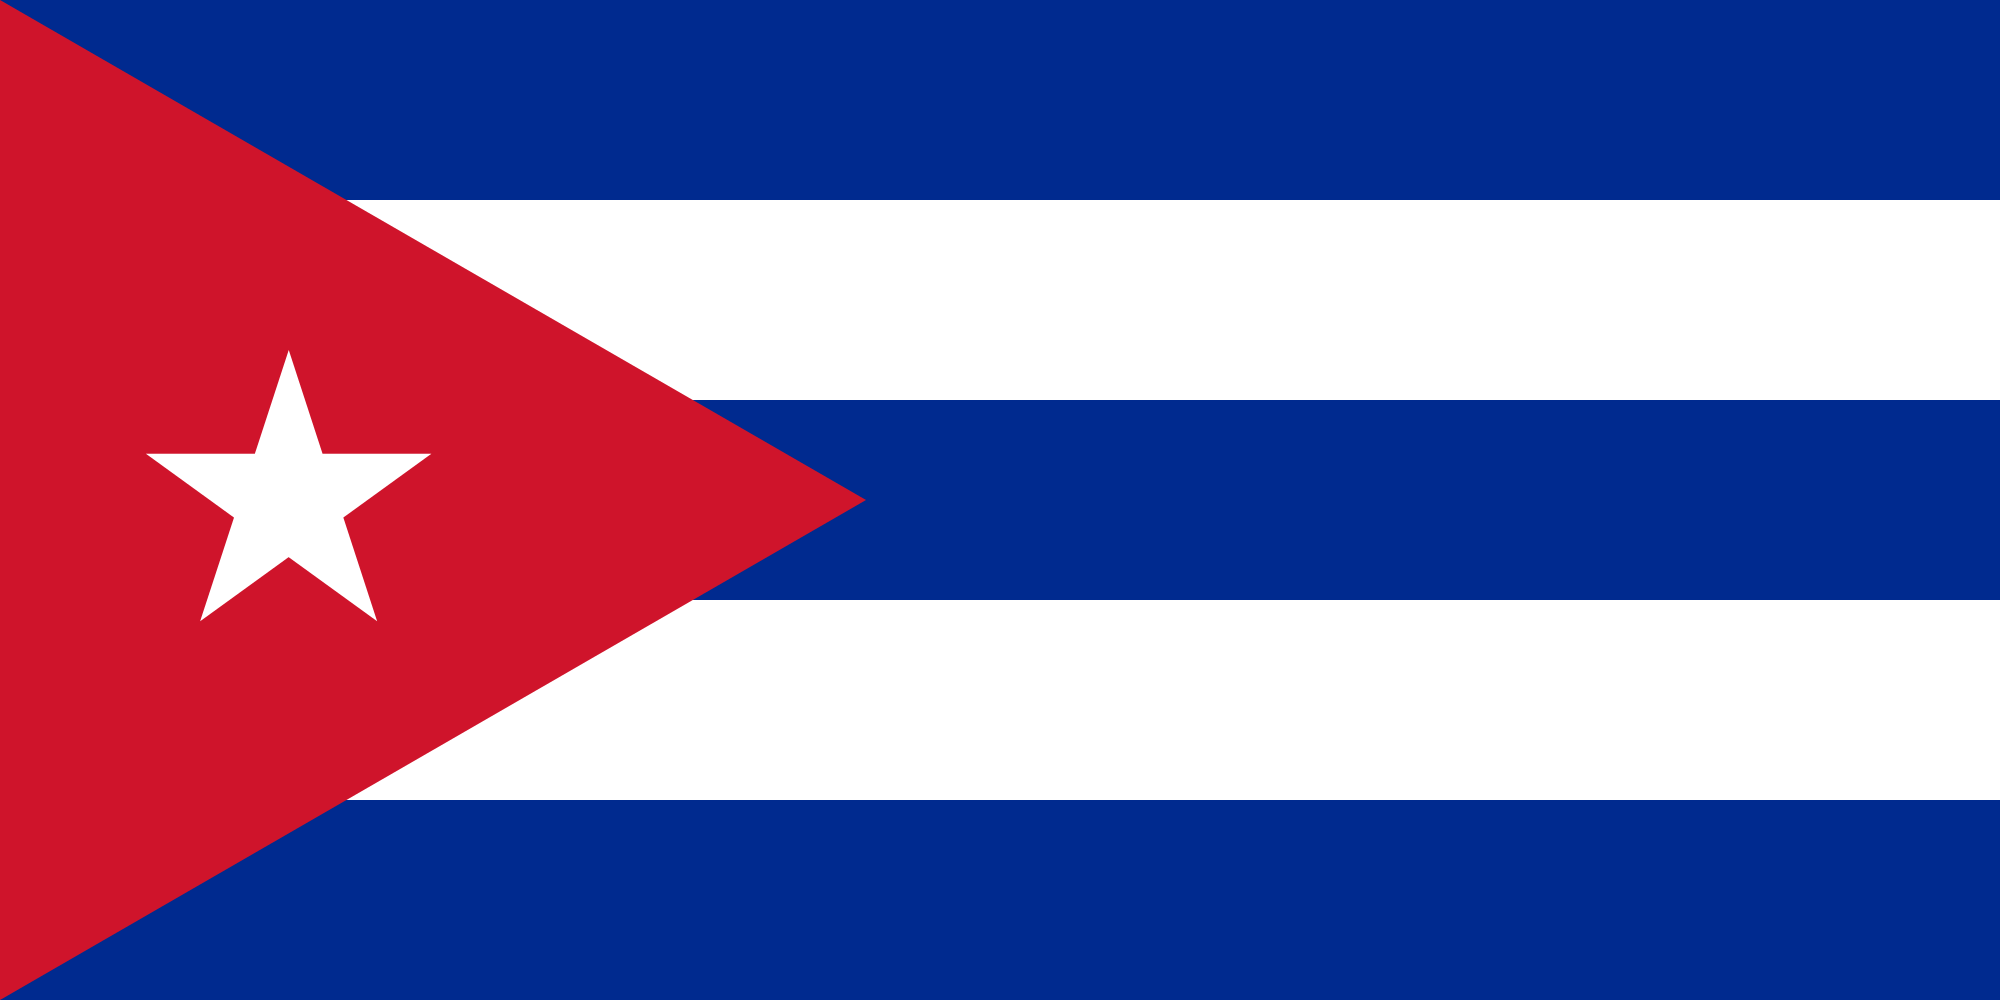 4 White Red Triangle Logo - Flag of Cuba